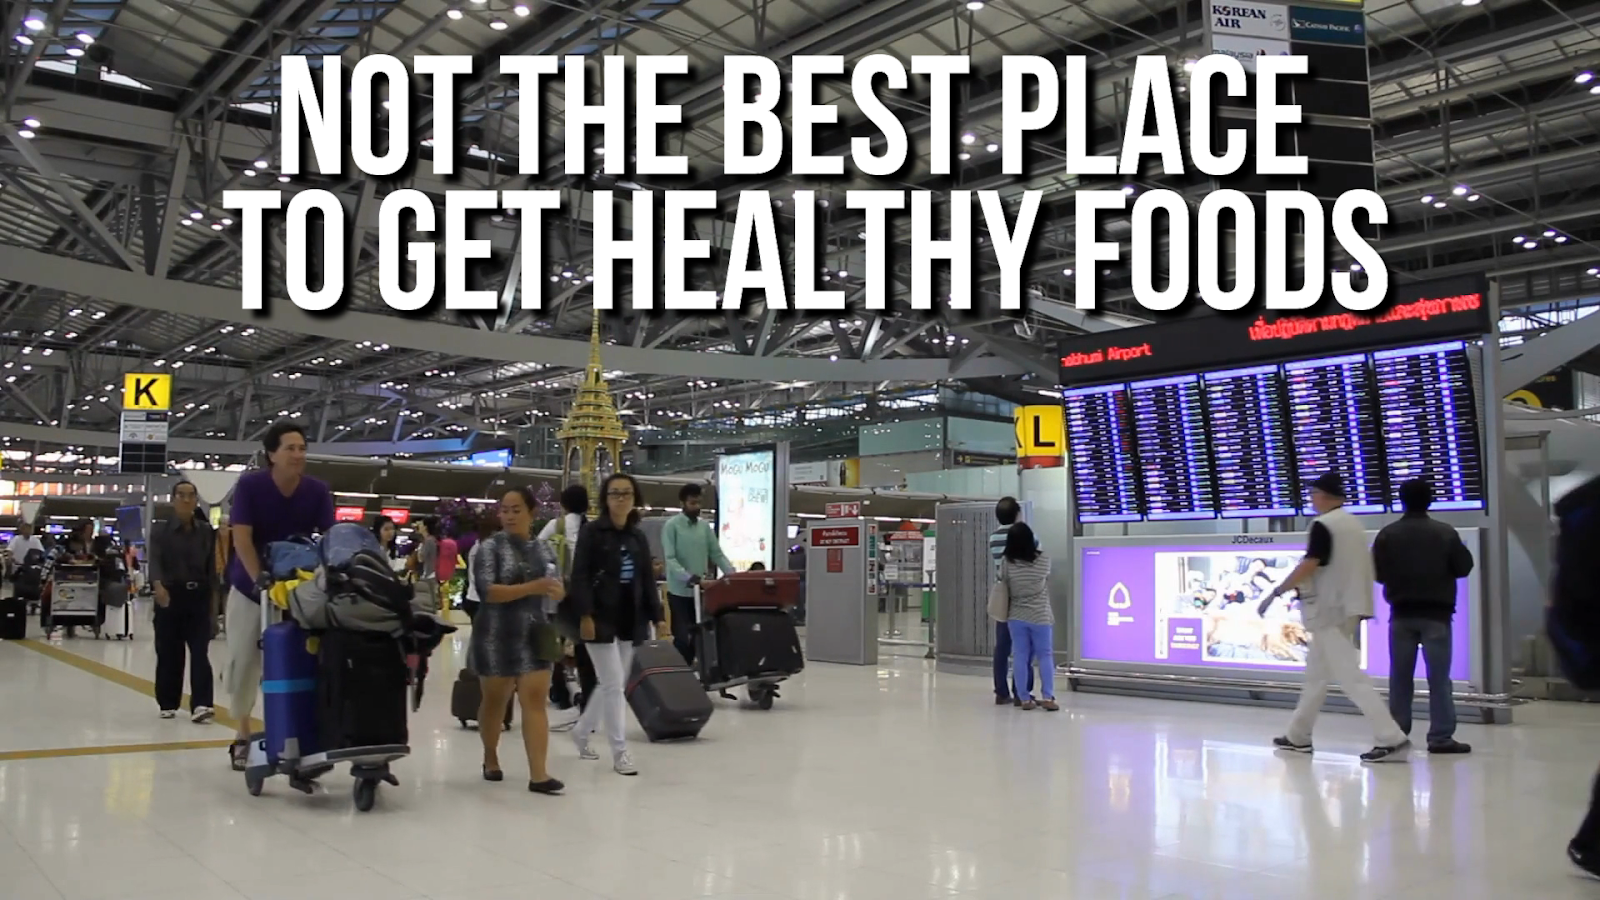 Airports are notorious for unhealthy and limited food options